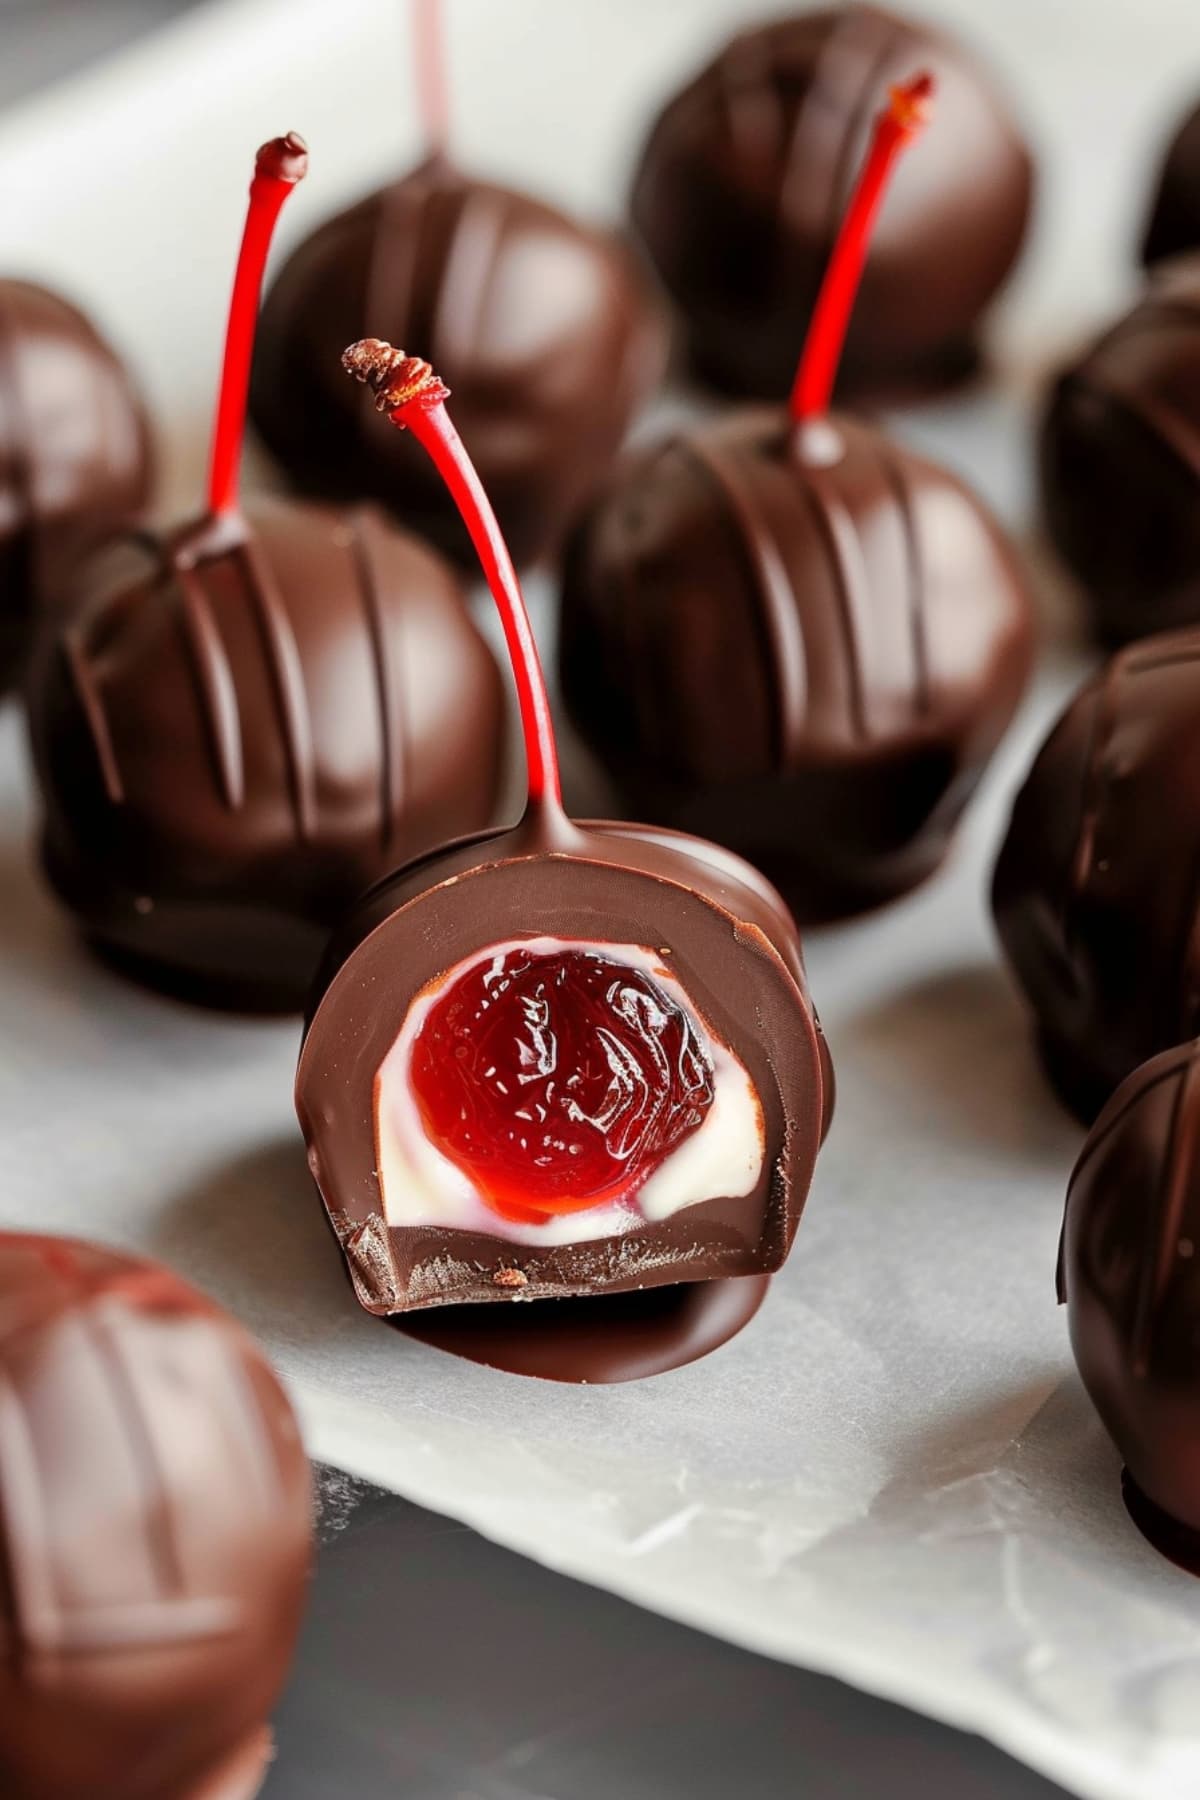 Sweet homemade chocolate covered cherries with vanilla filling